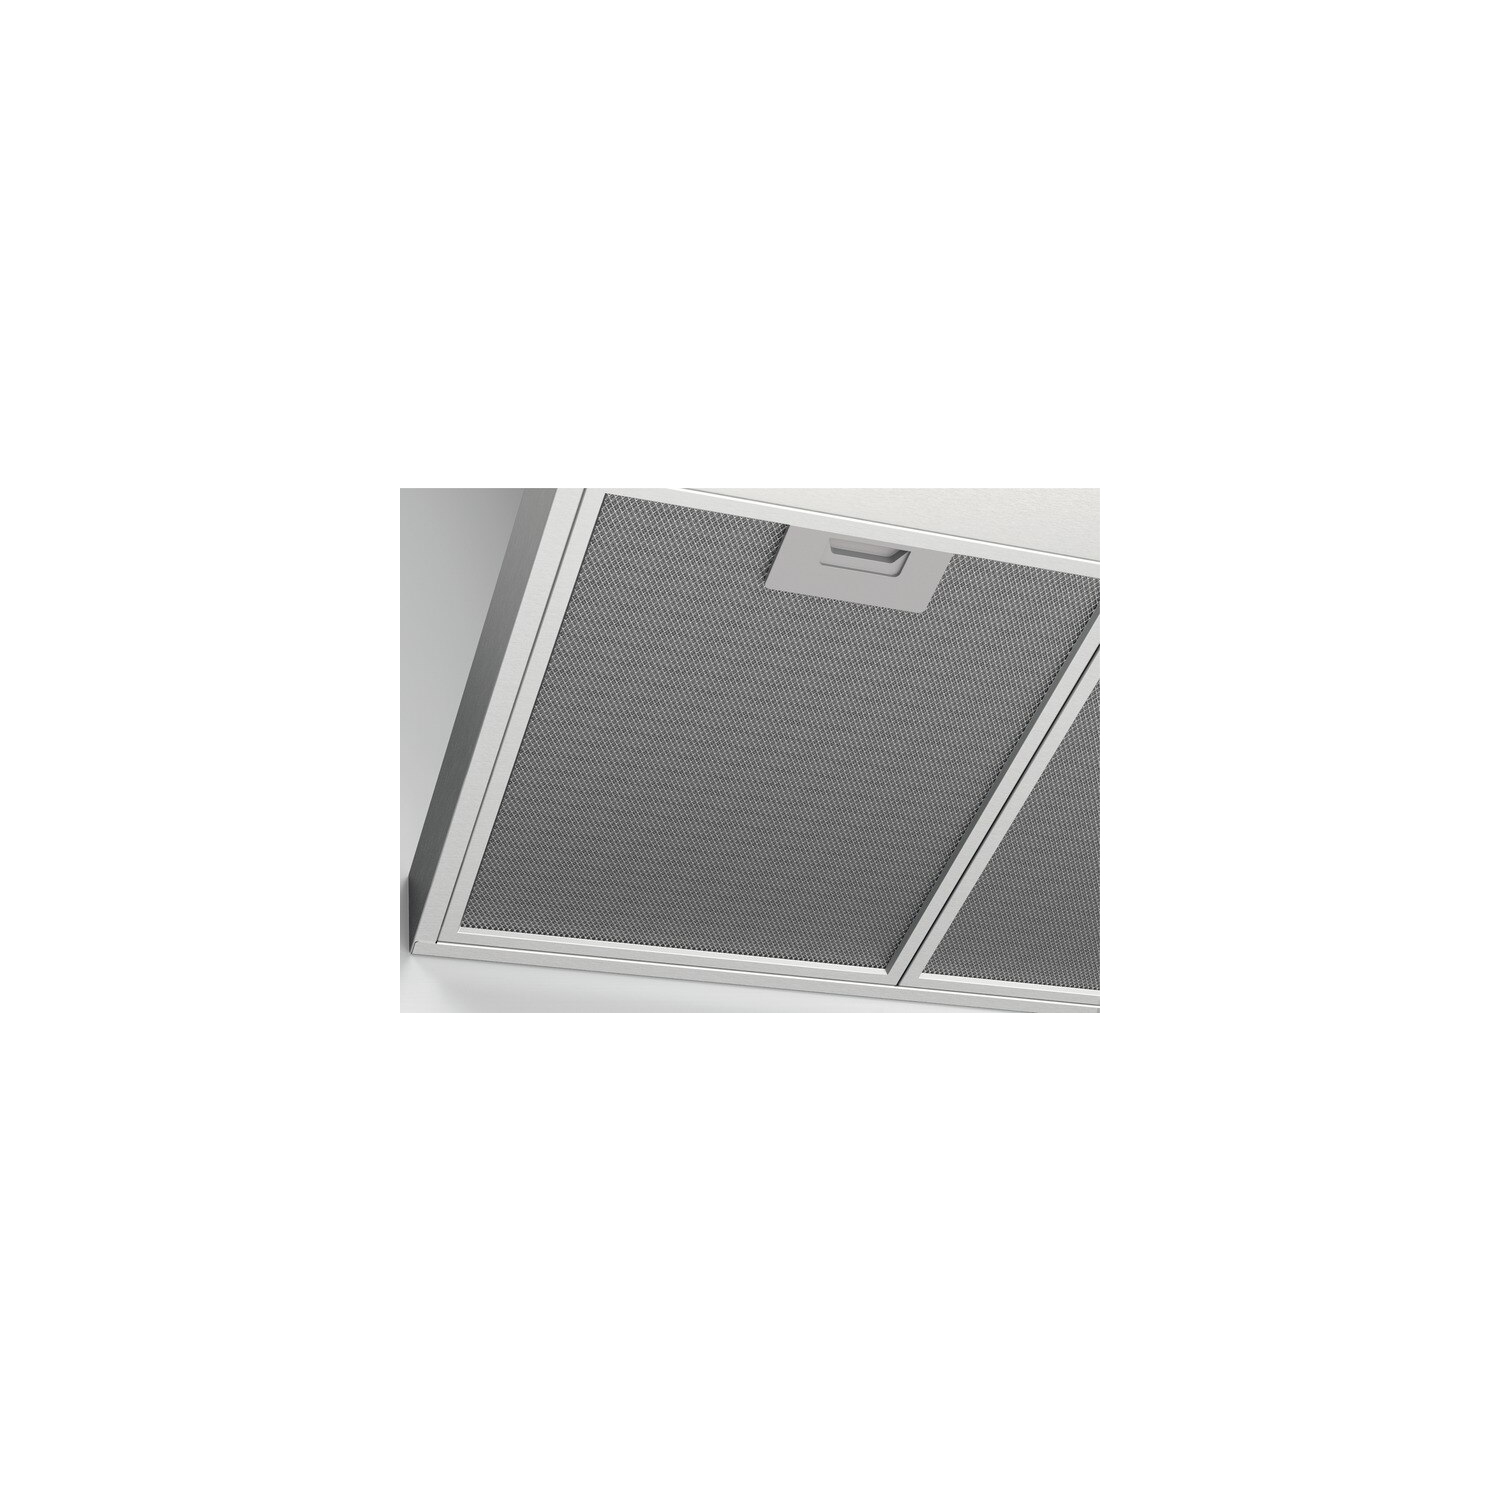 Zanussi 60cm Chimney Hood - Stainless Steel - C Rated - 1